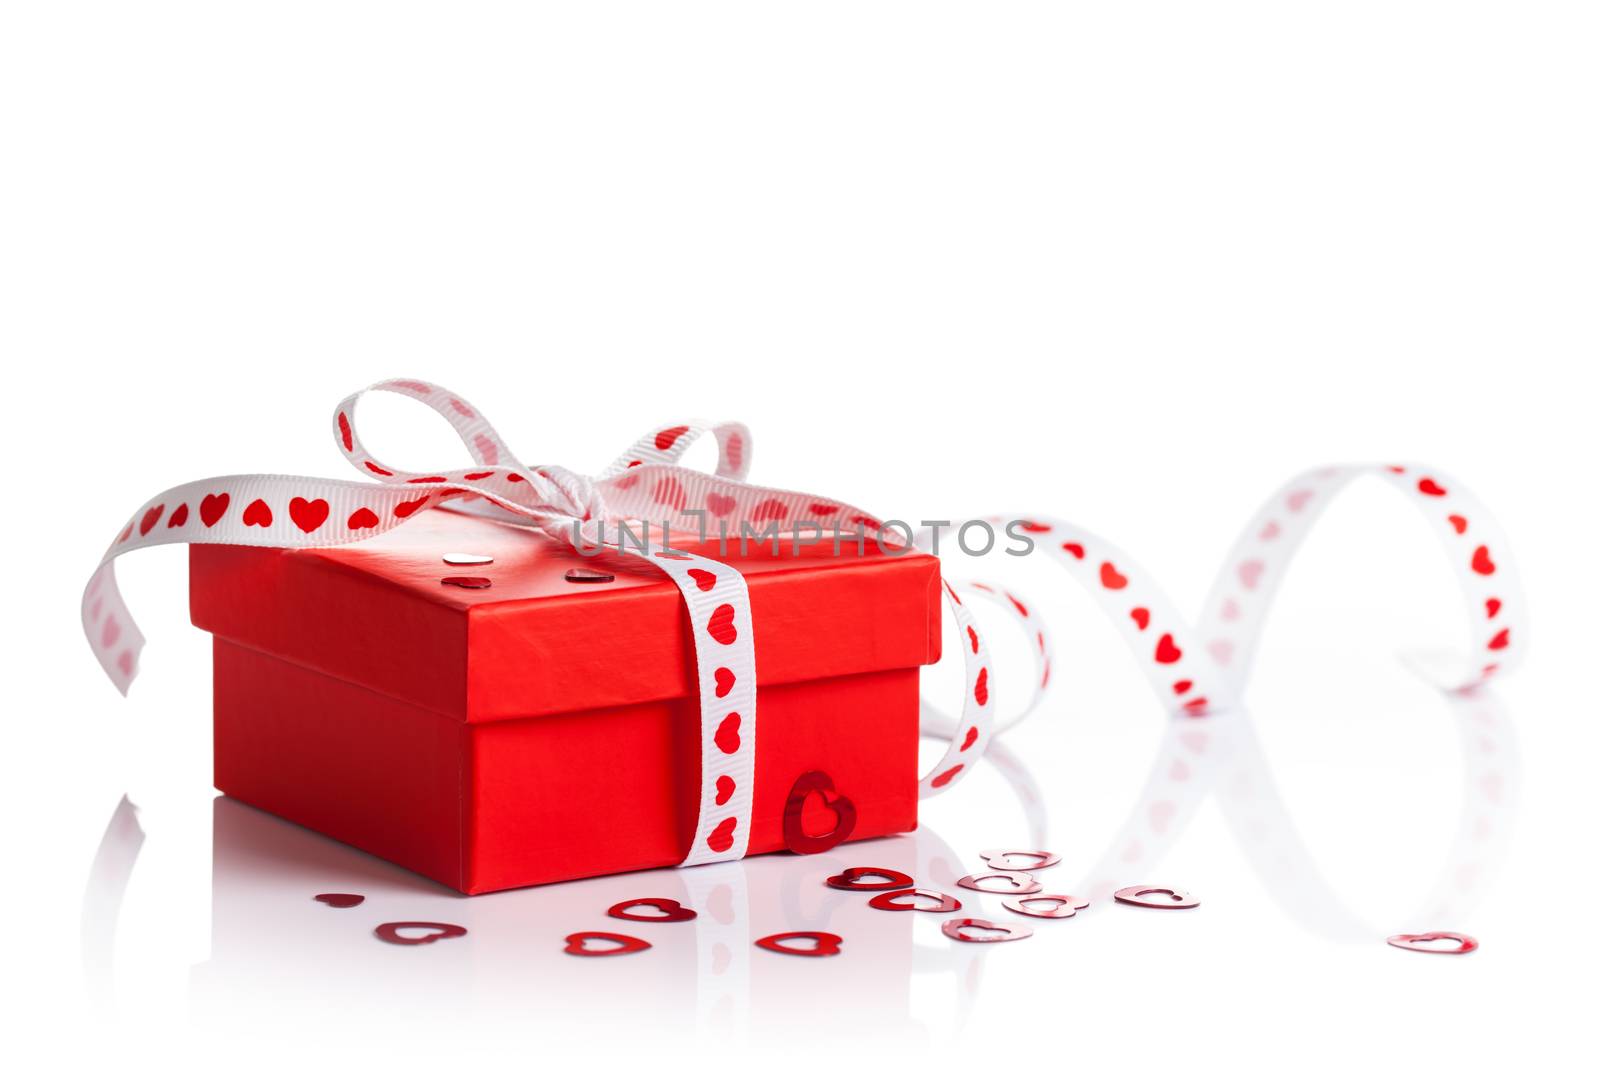 Gift box with ribbon on white background. Valentines Day composition